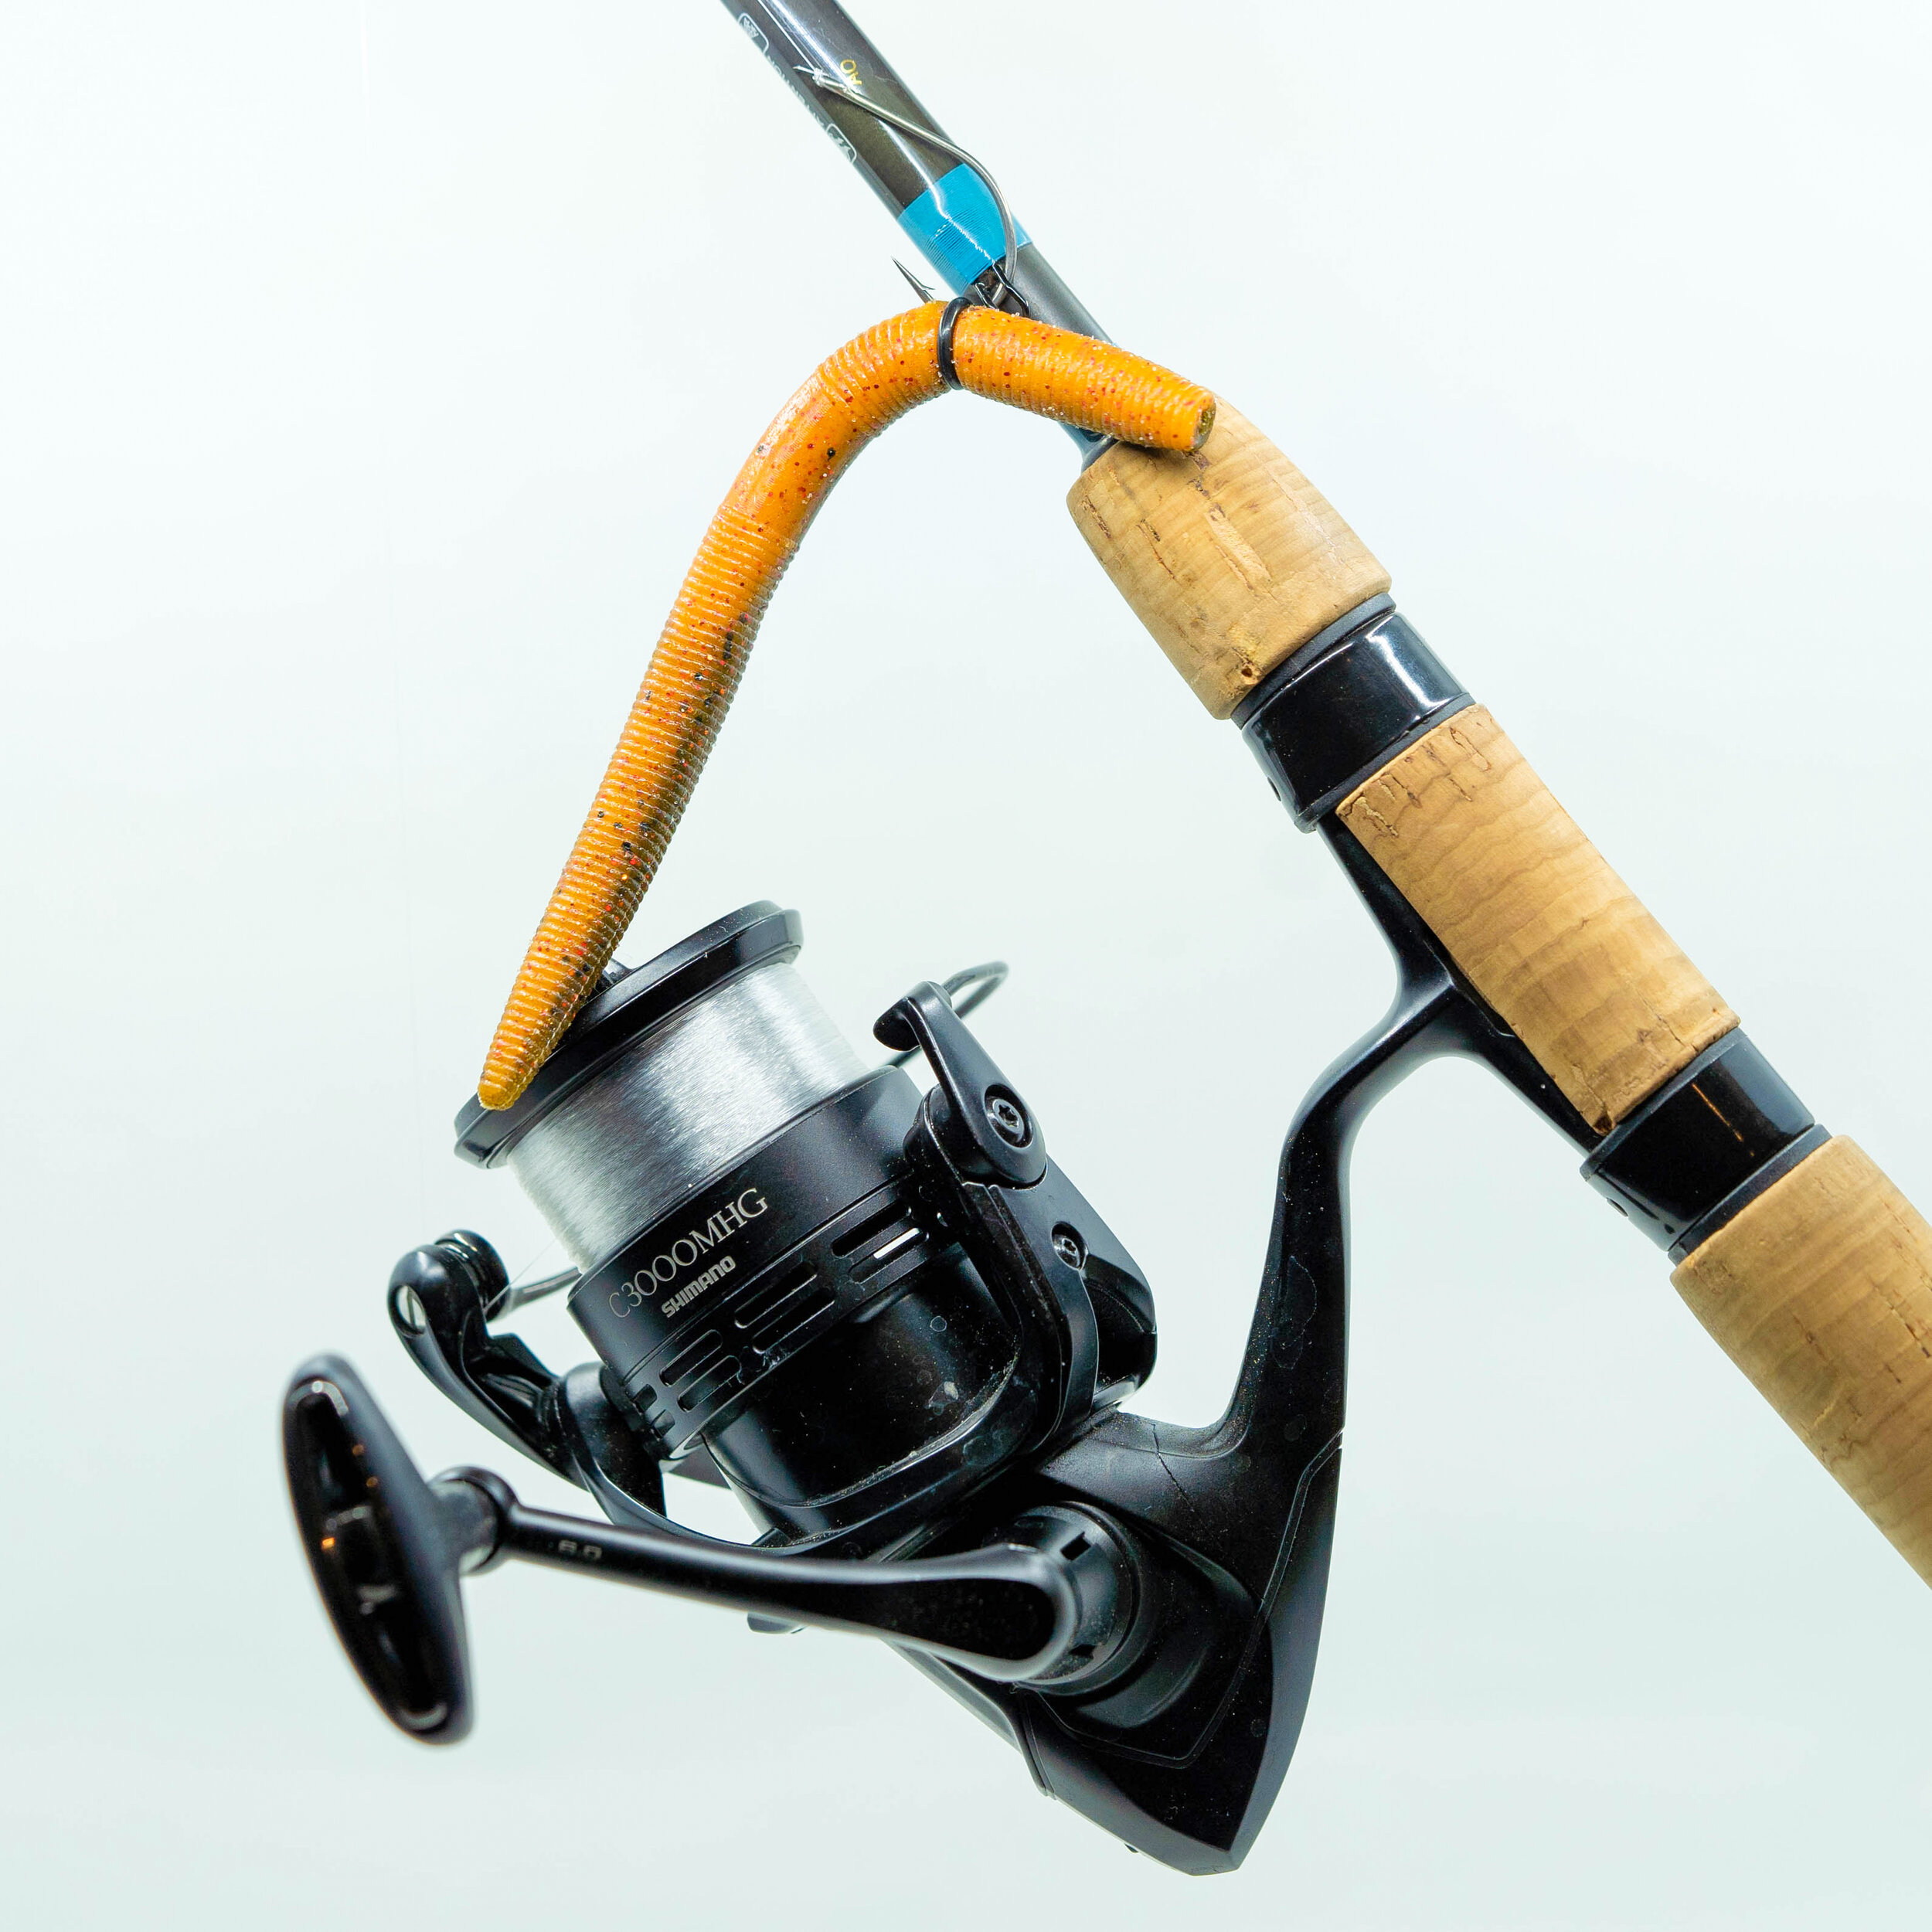 Top 5 Fishing Rods Every Angler Needs! (Beginner To Advanced